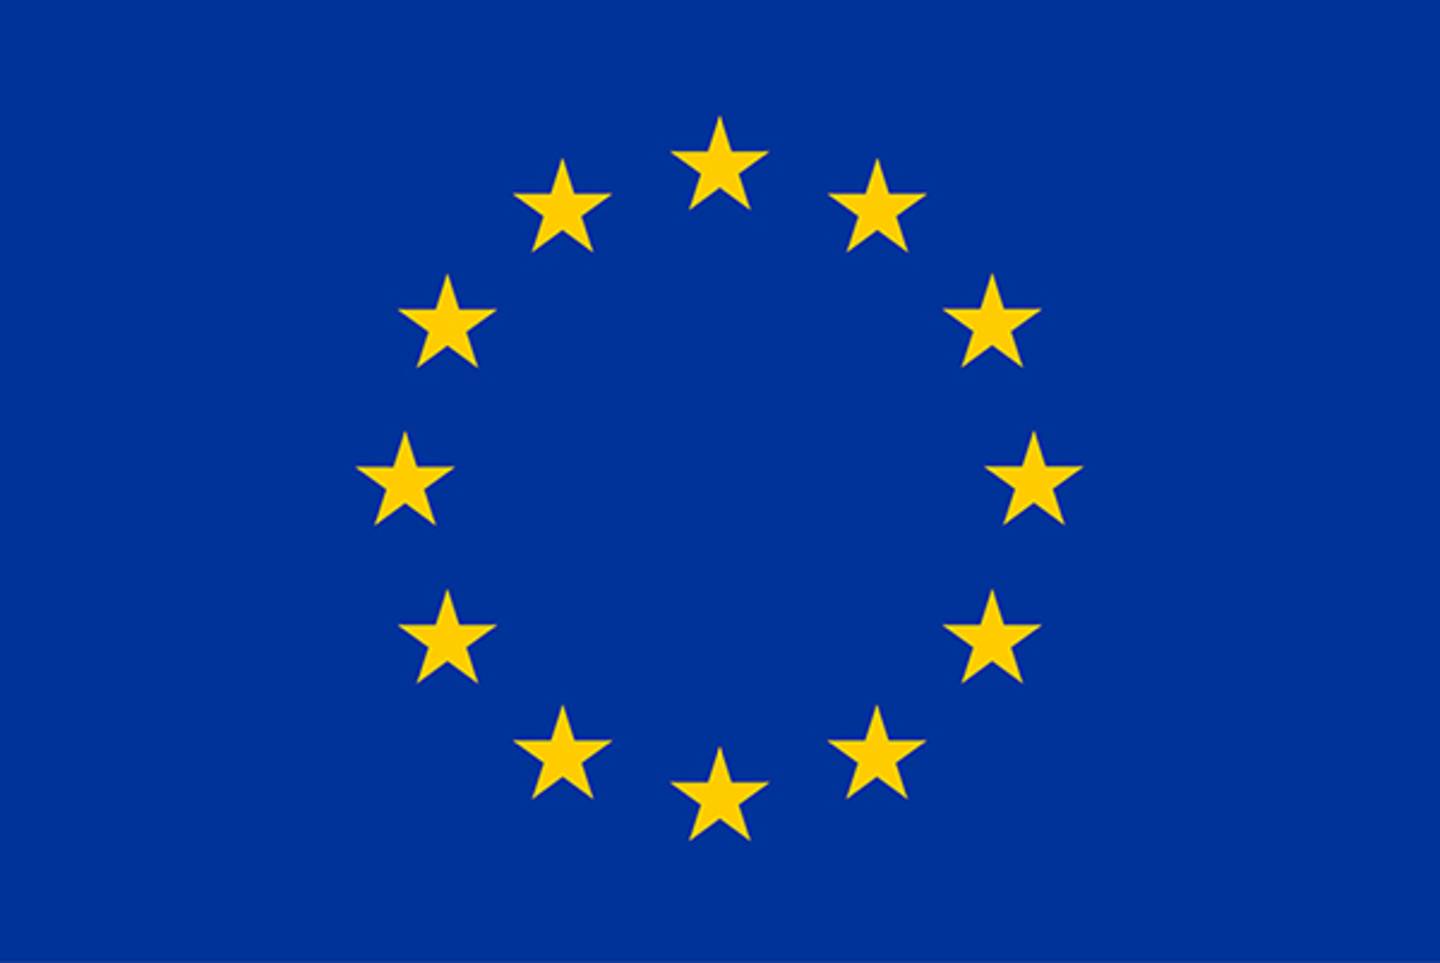 [This content is not available in "Englisch" yet] EU Logo